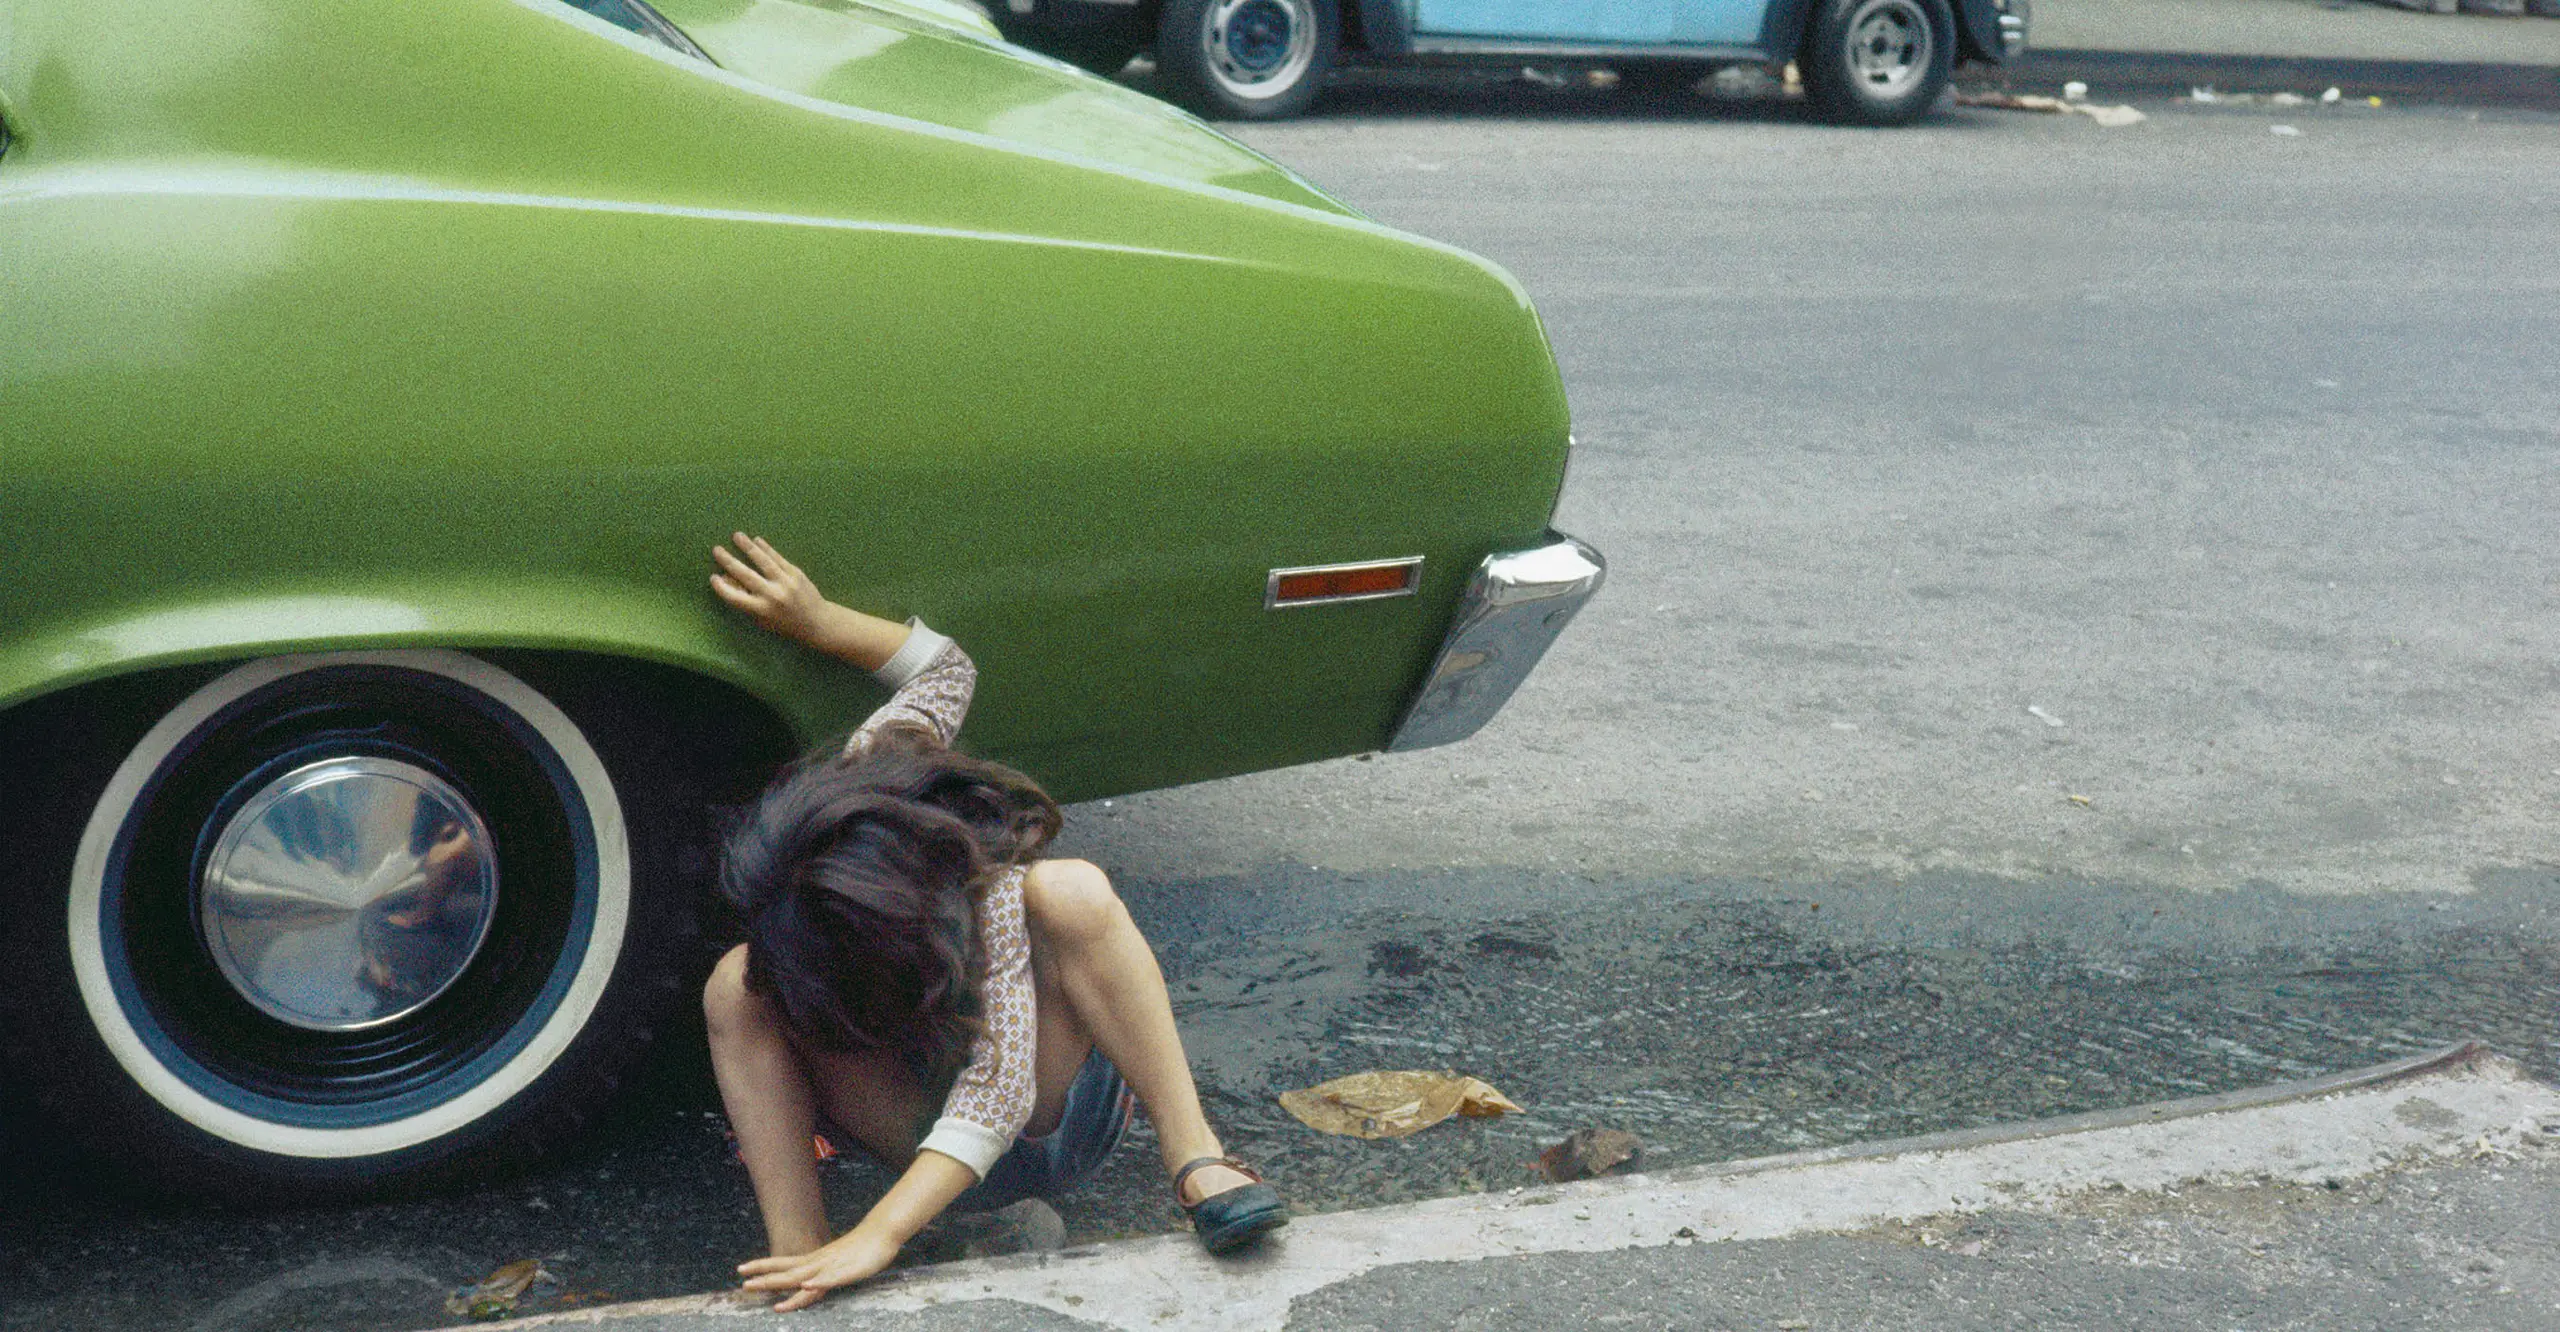 A photograph of the back end of a green car with a person crouched down near the wheel.